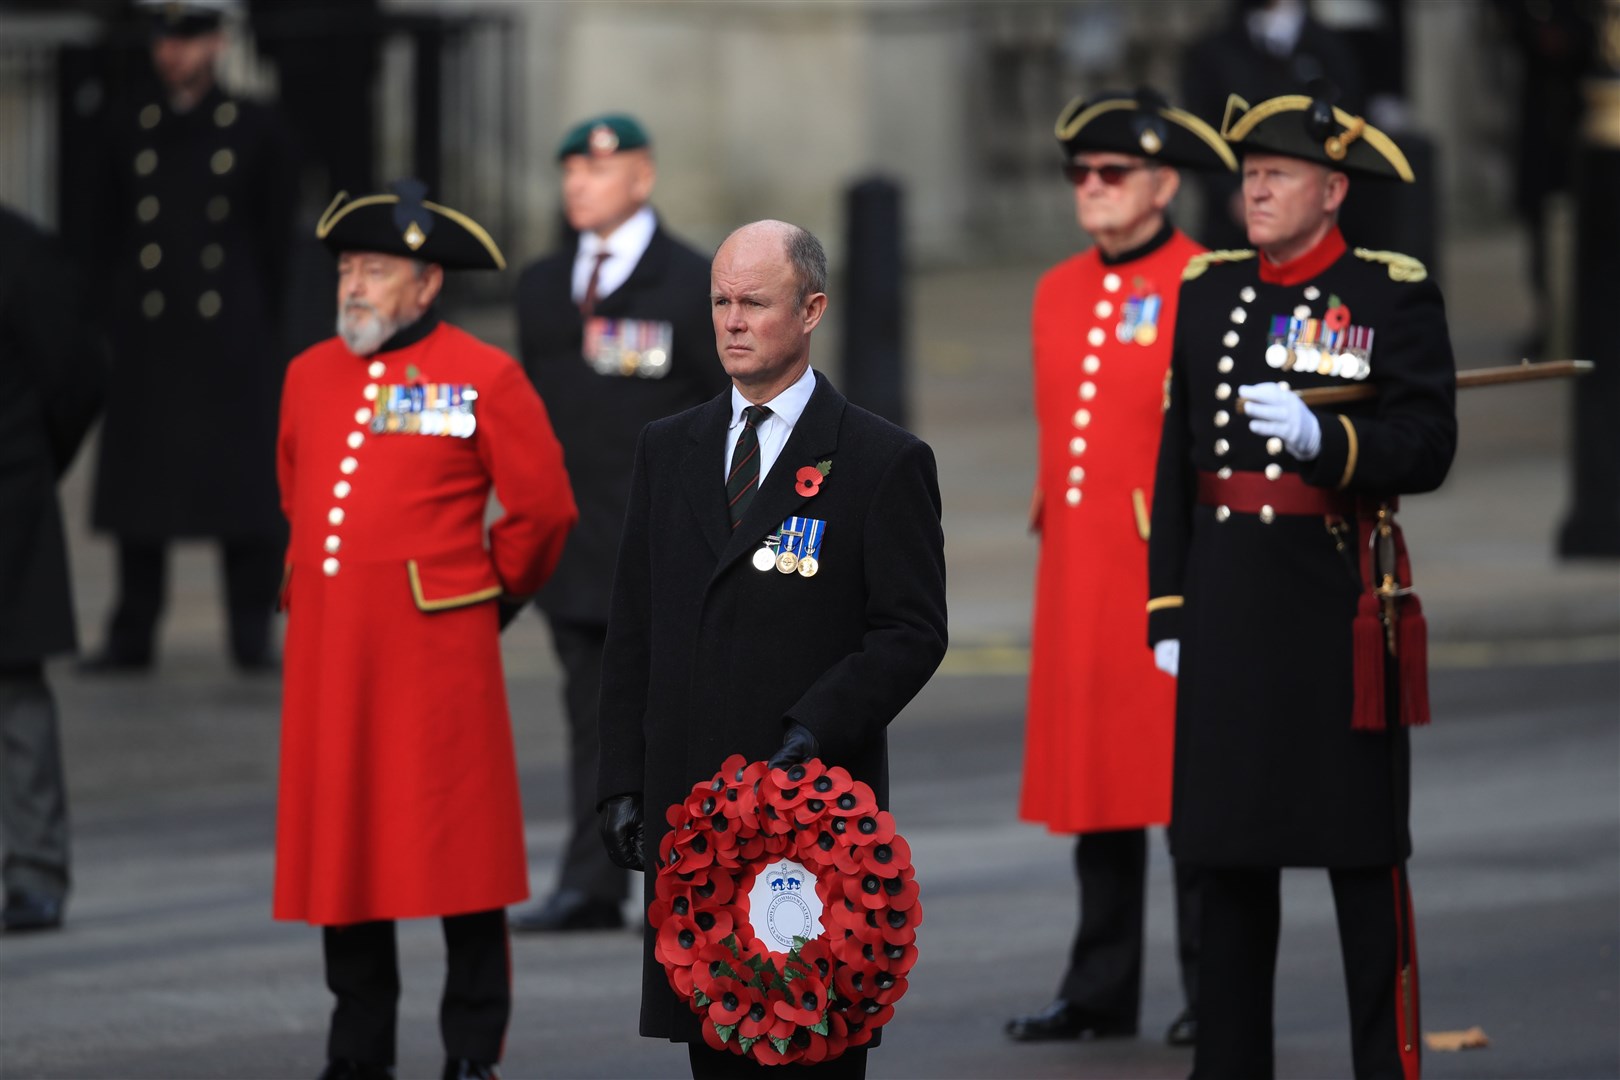 Veterans attend the Remembrance Sunday service at the Cenotaph (Aaron Chown/PA)